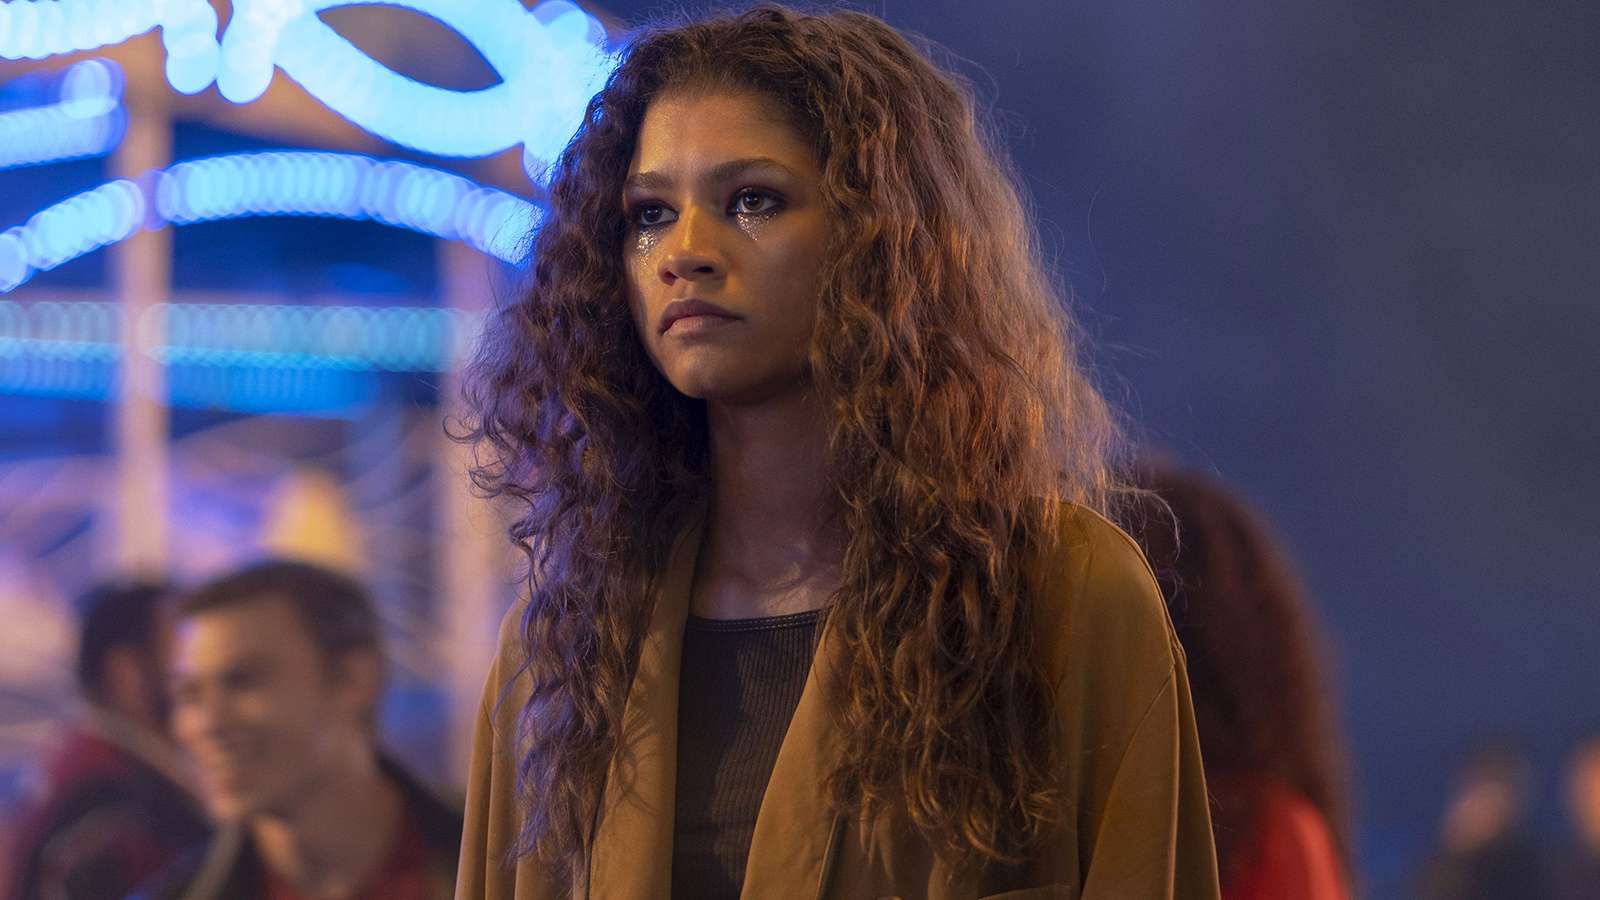 Euphoria Season 3: Release, Cast and Everything We Know So Far